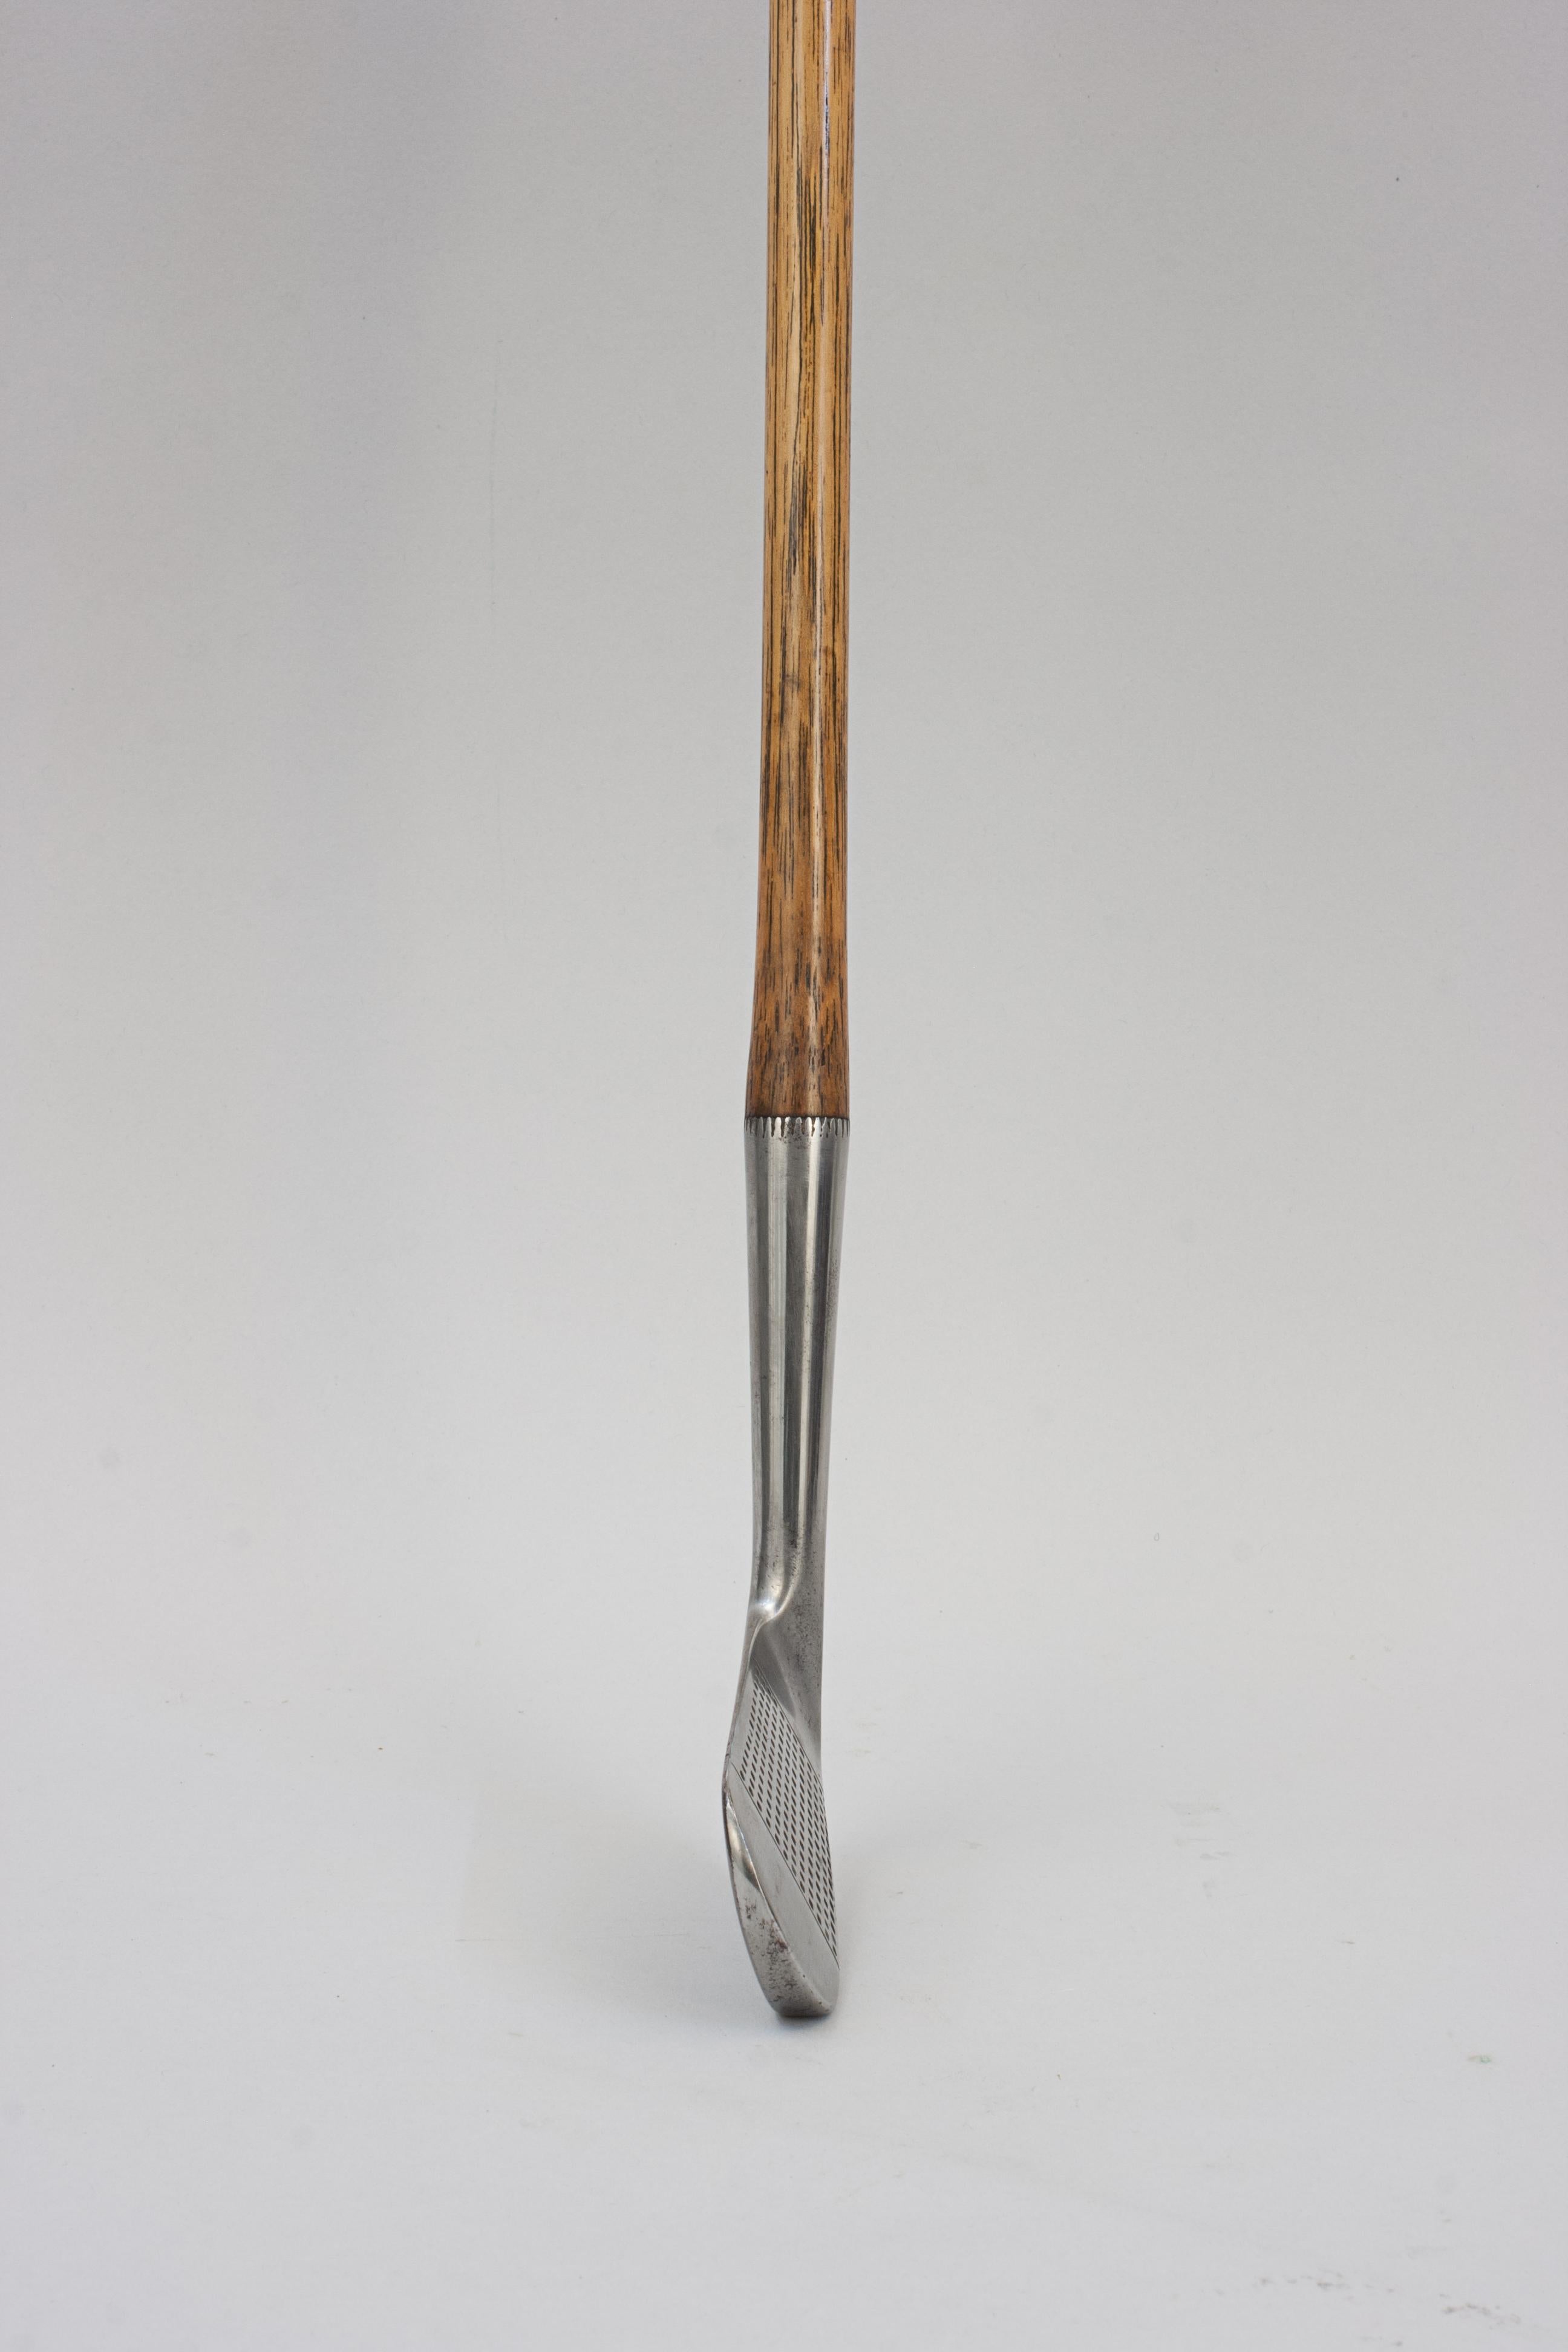 British Vintage Hickory Golf Club, Mid Iron. For Sale